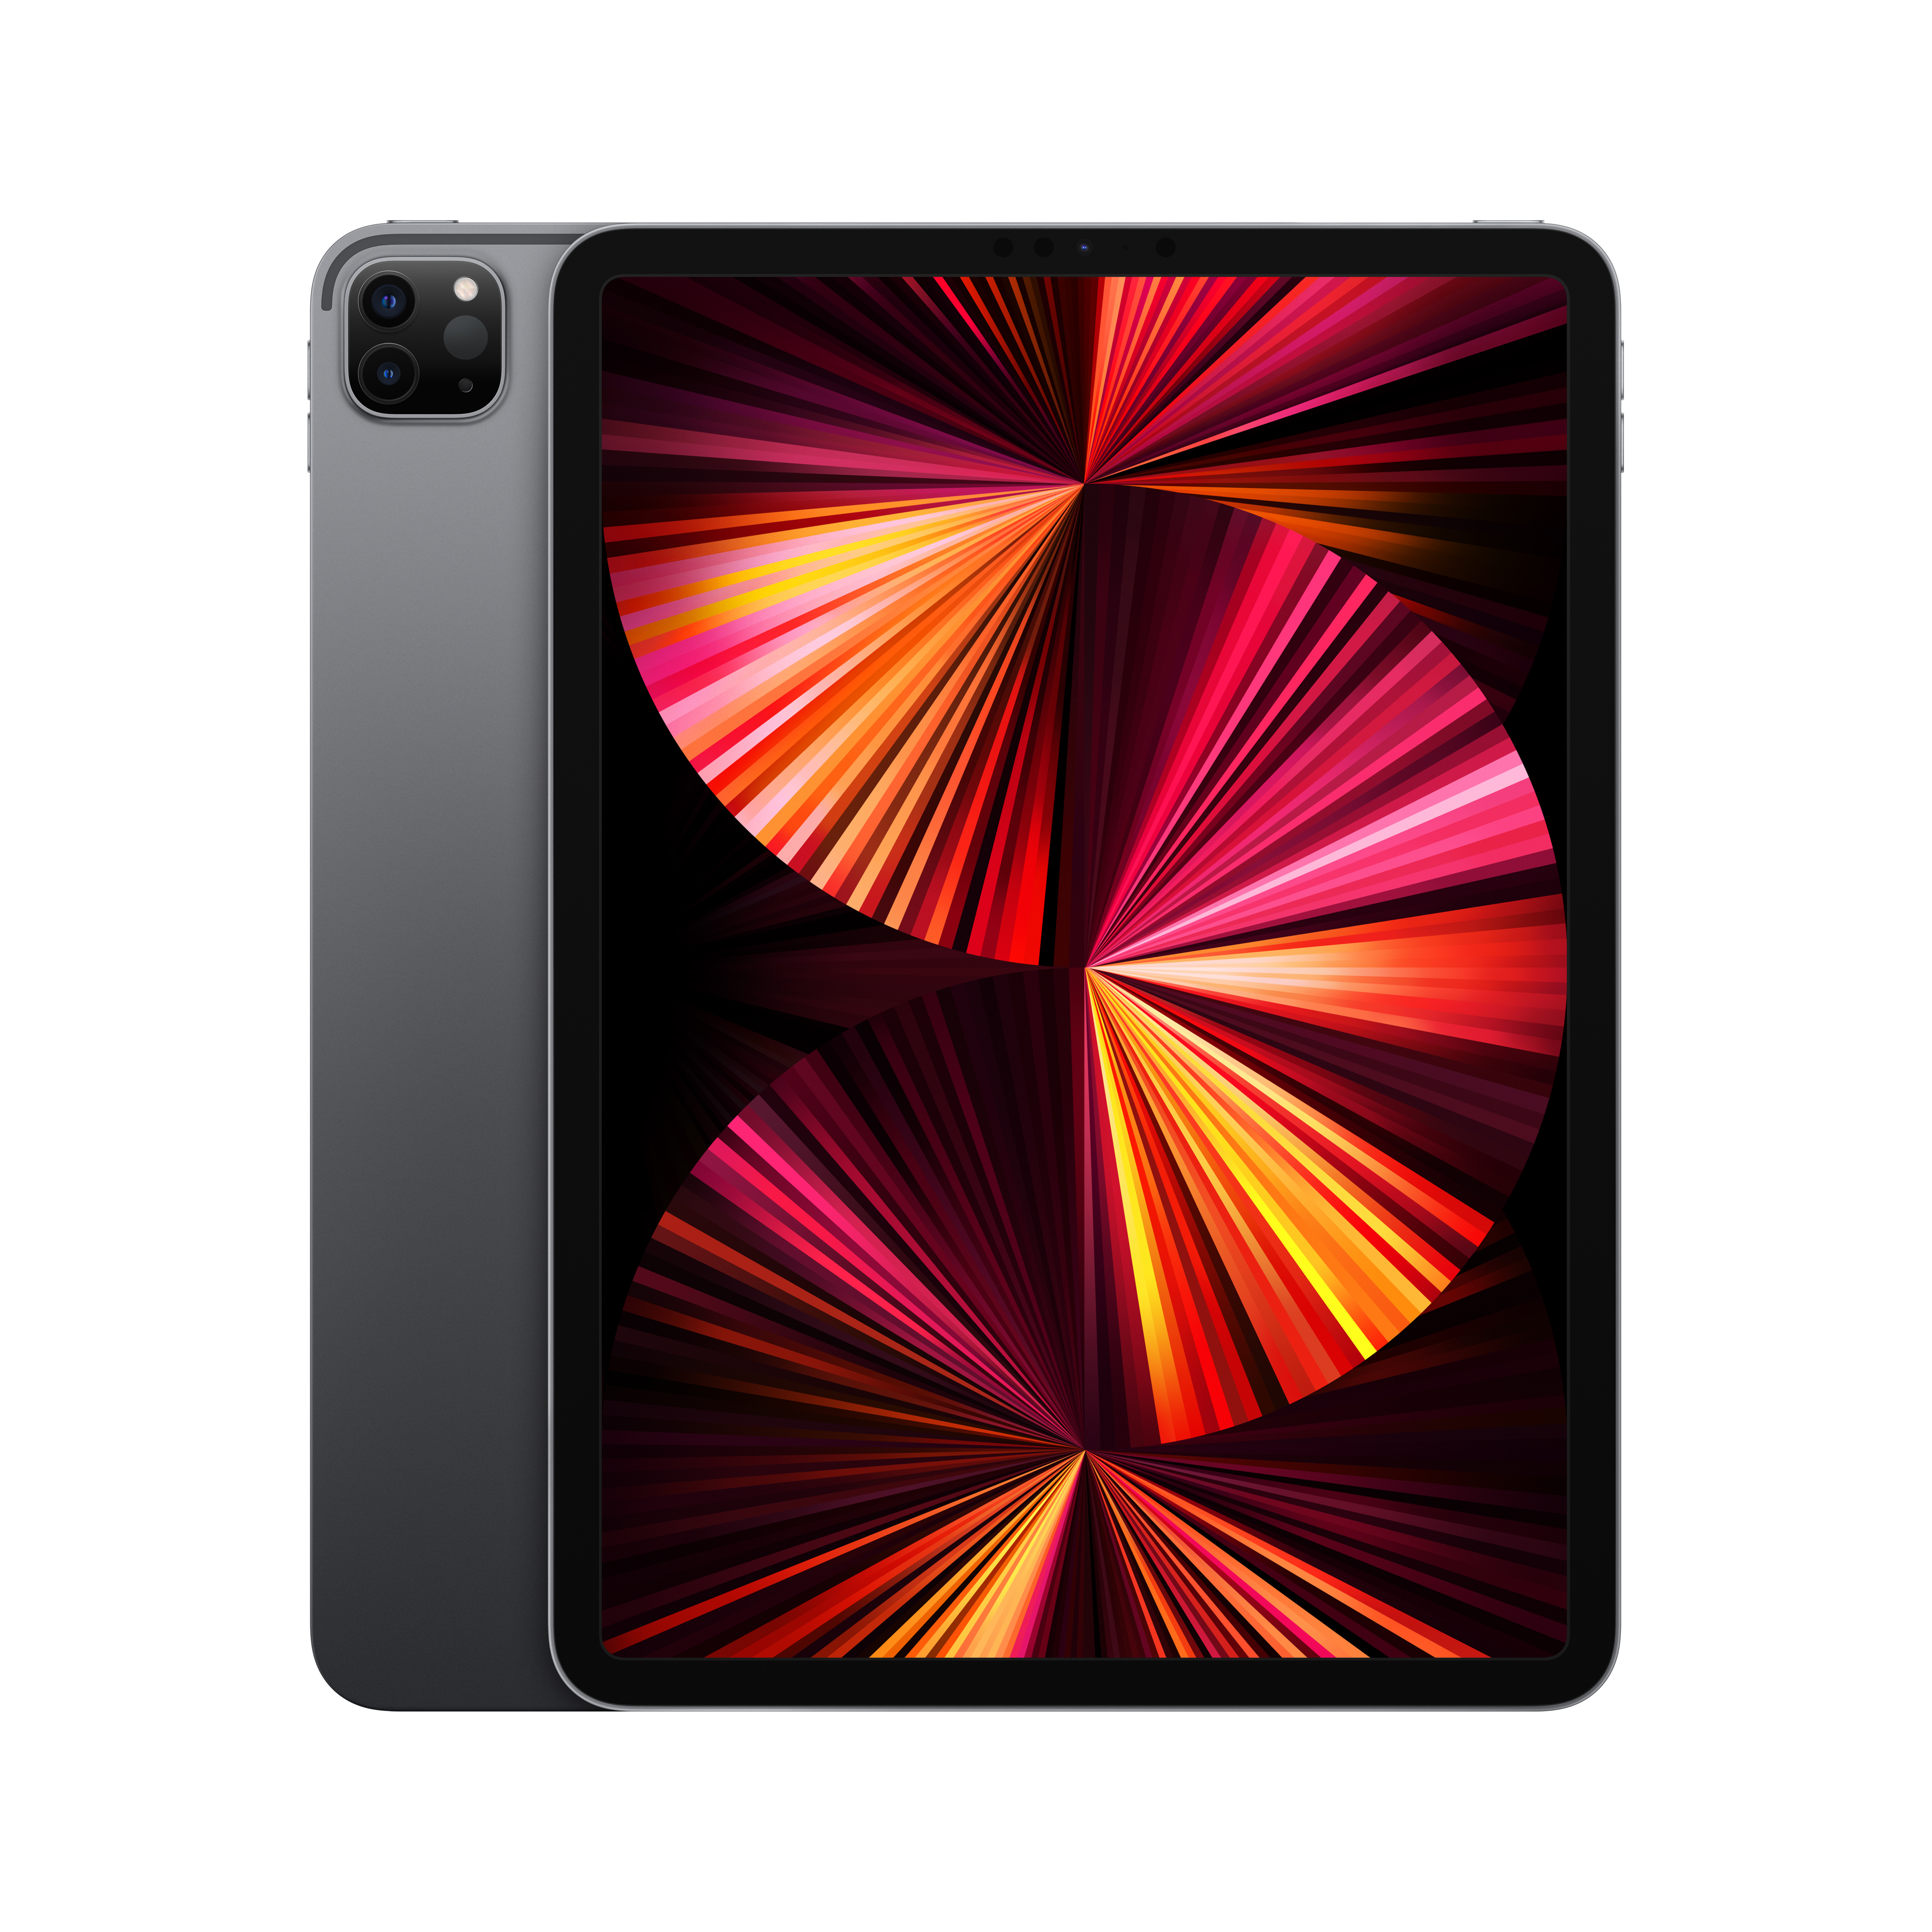 2021 Apple 11-inch iPad Pro Wi-Fi 2TB - Space Gray (3rd Generation) - image 1 of 9